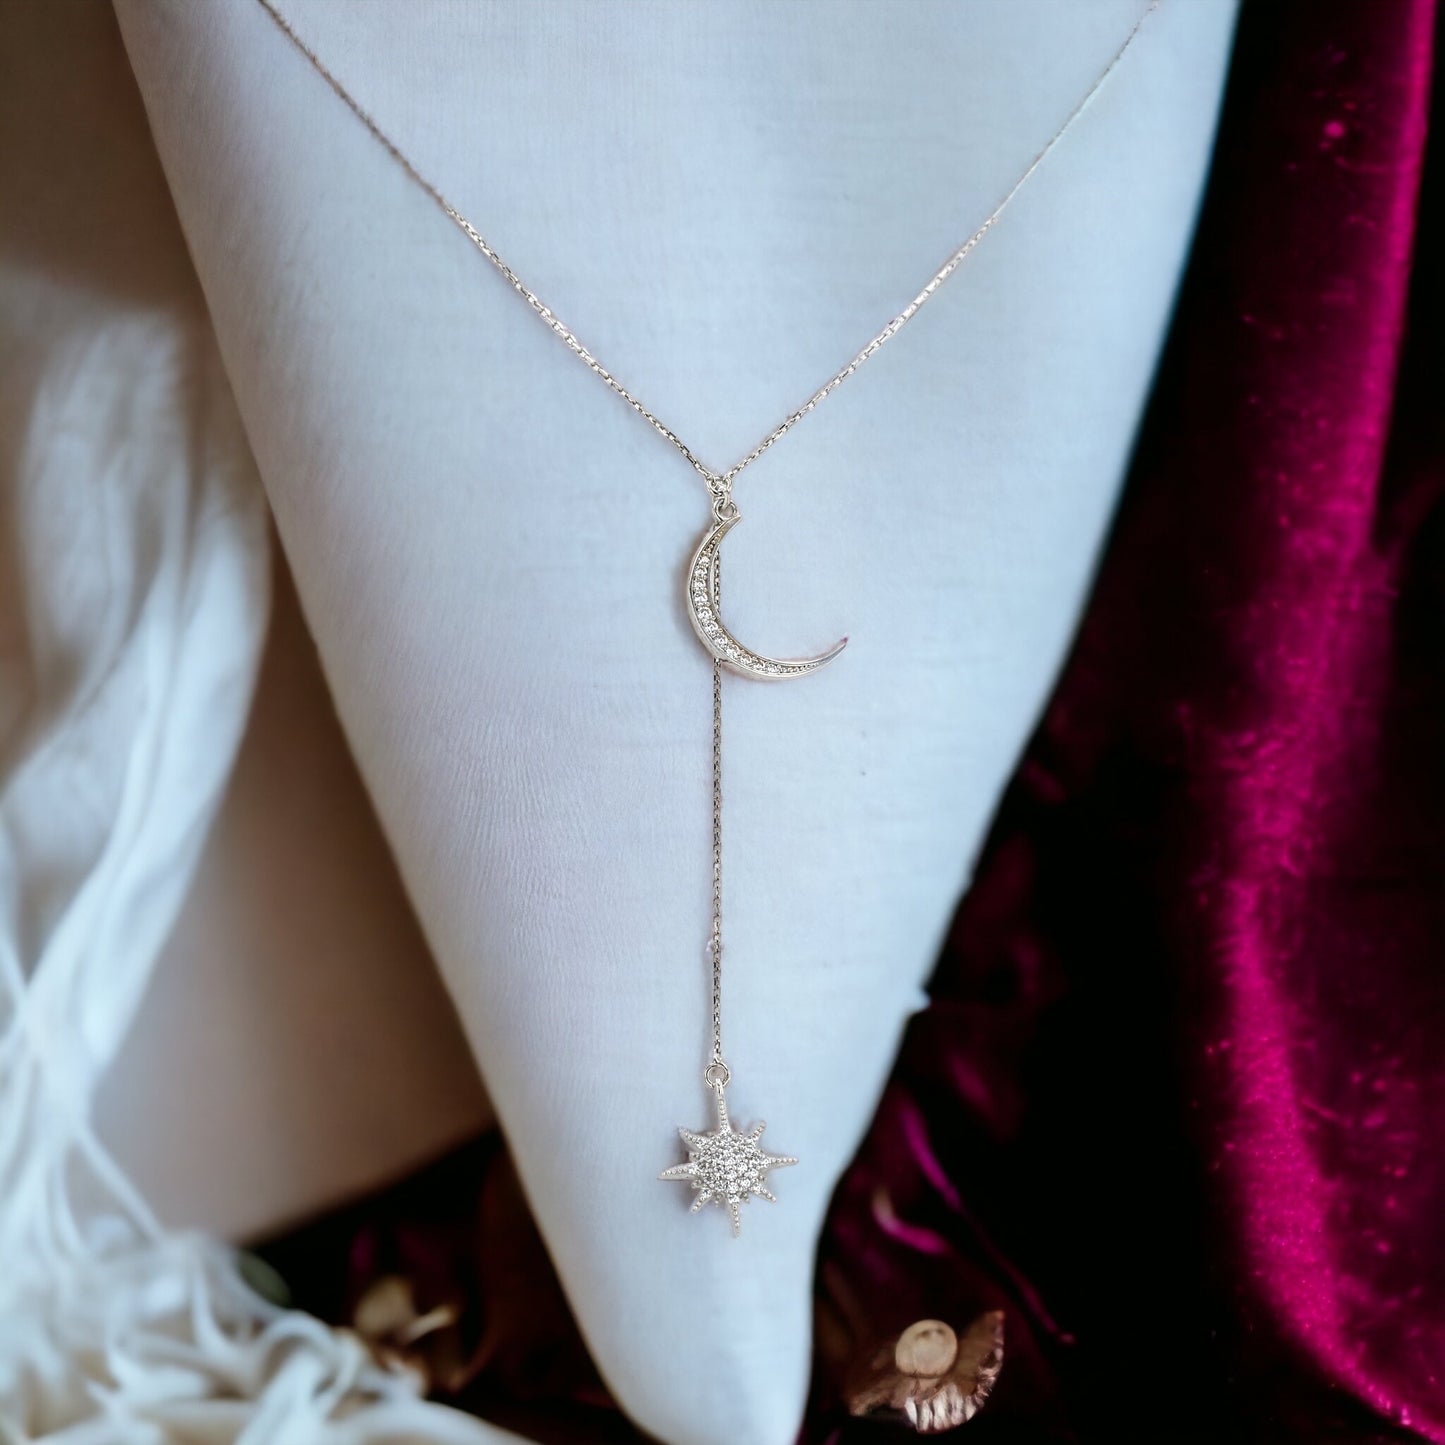 White 14k gold moon and star necklace